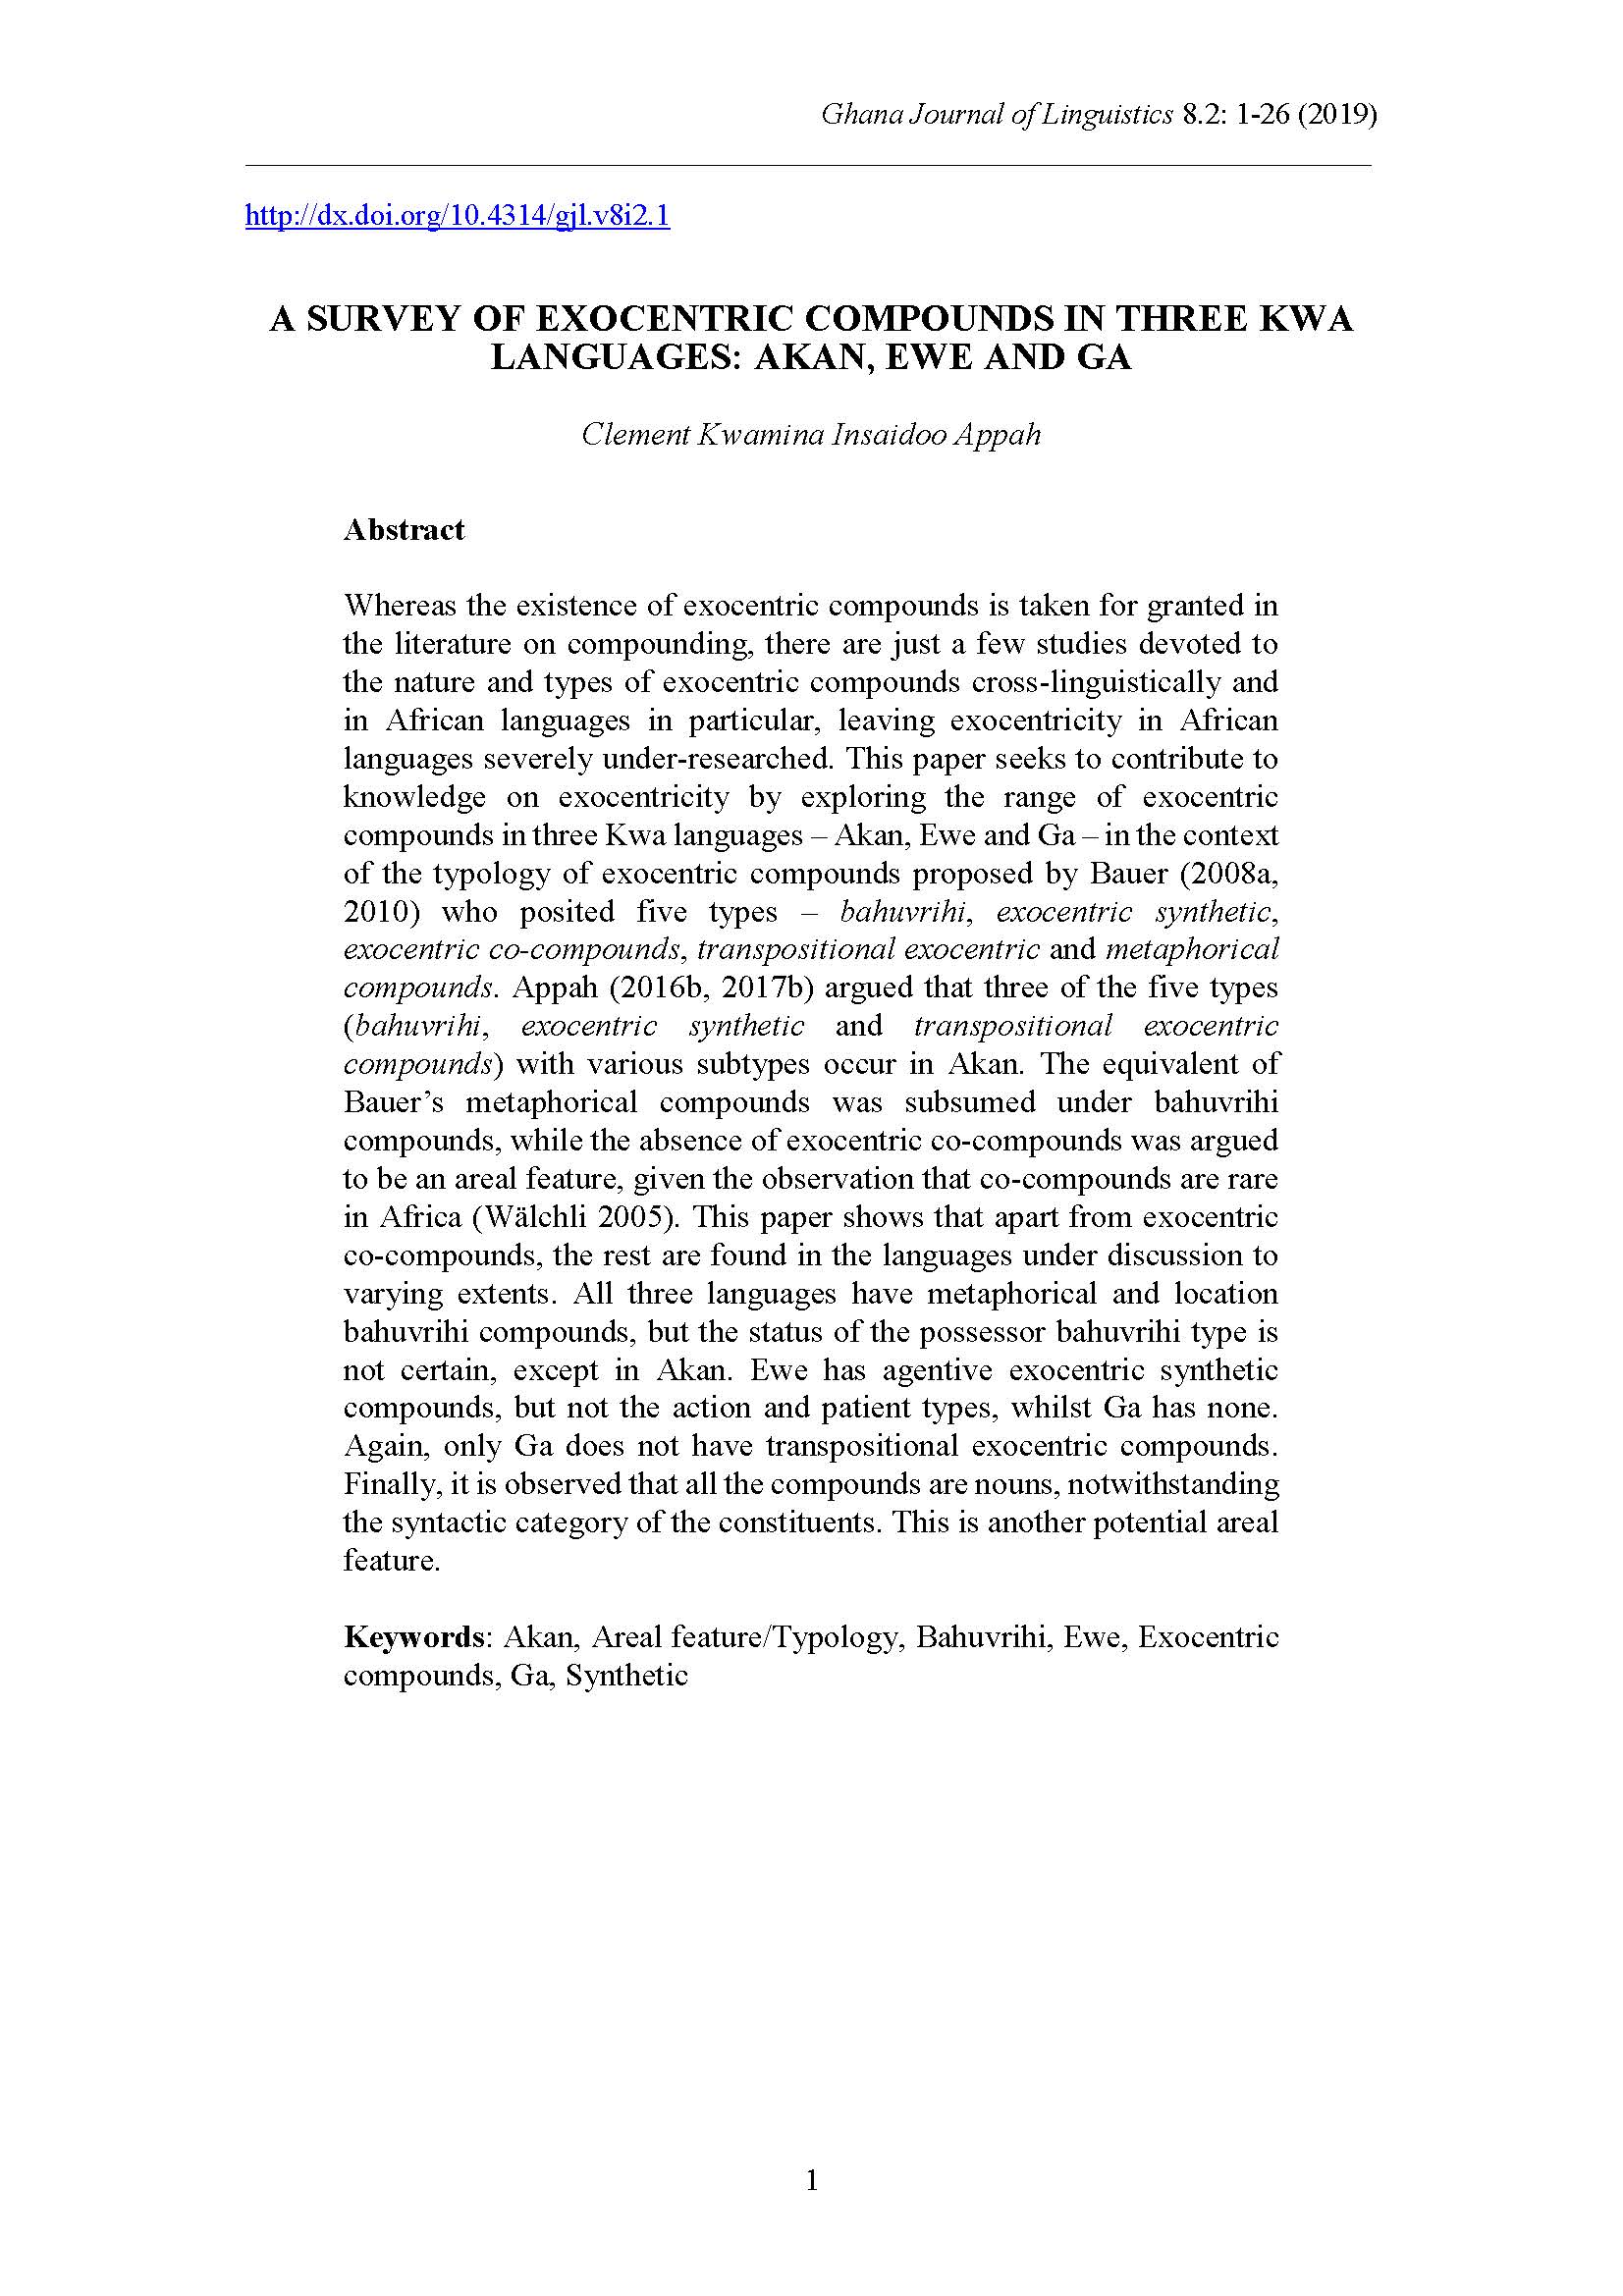 a survey of exocentric compounds in three kwa languages: akan, ewe, and ga